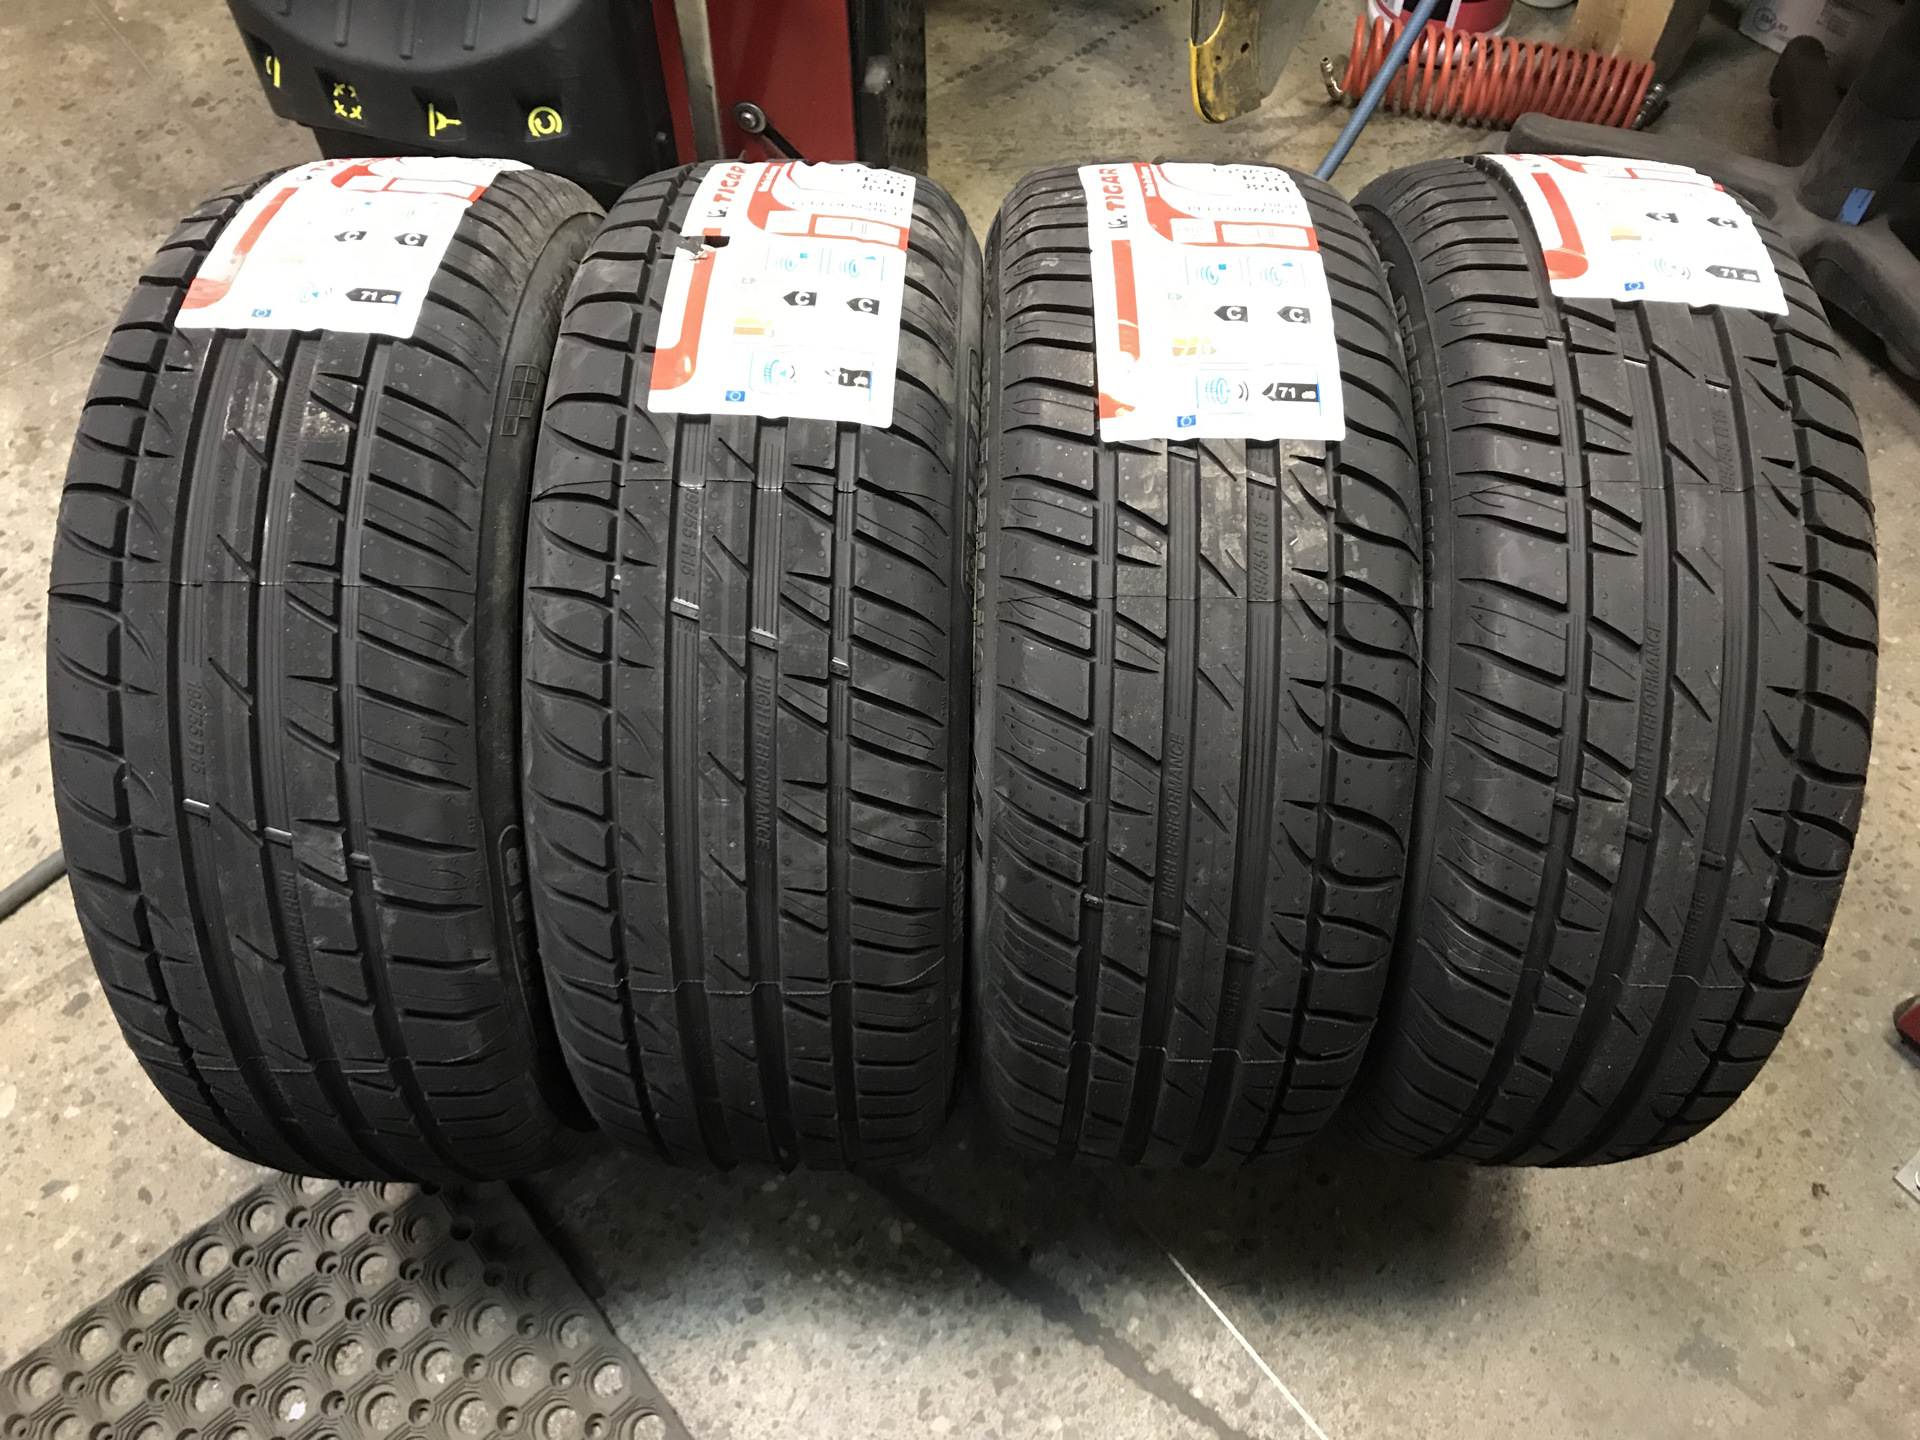 High performance отзывы. Tigar UHP 205/60 r15. Tigar High Performance 205/60 r16. Резина Tigar 215/55/17. Tigar UHP 185/65/15.